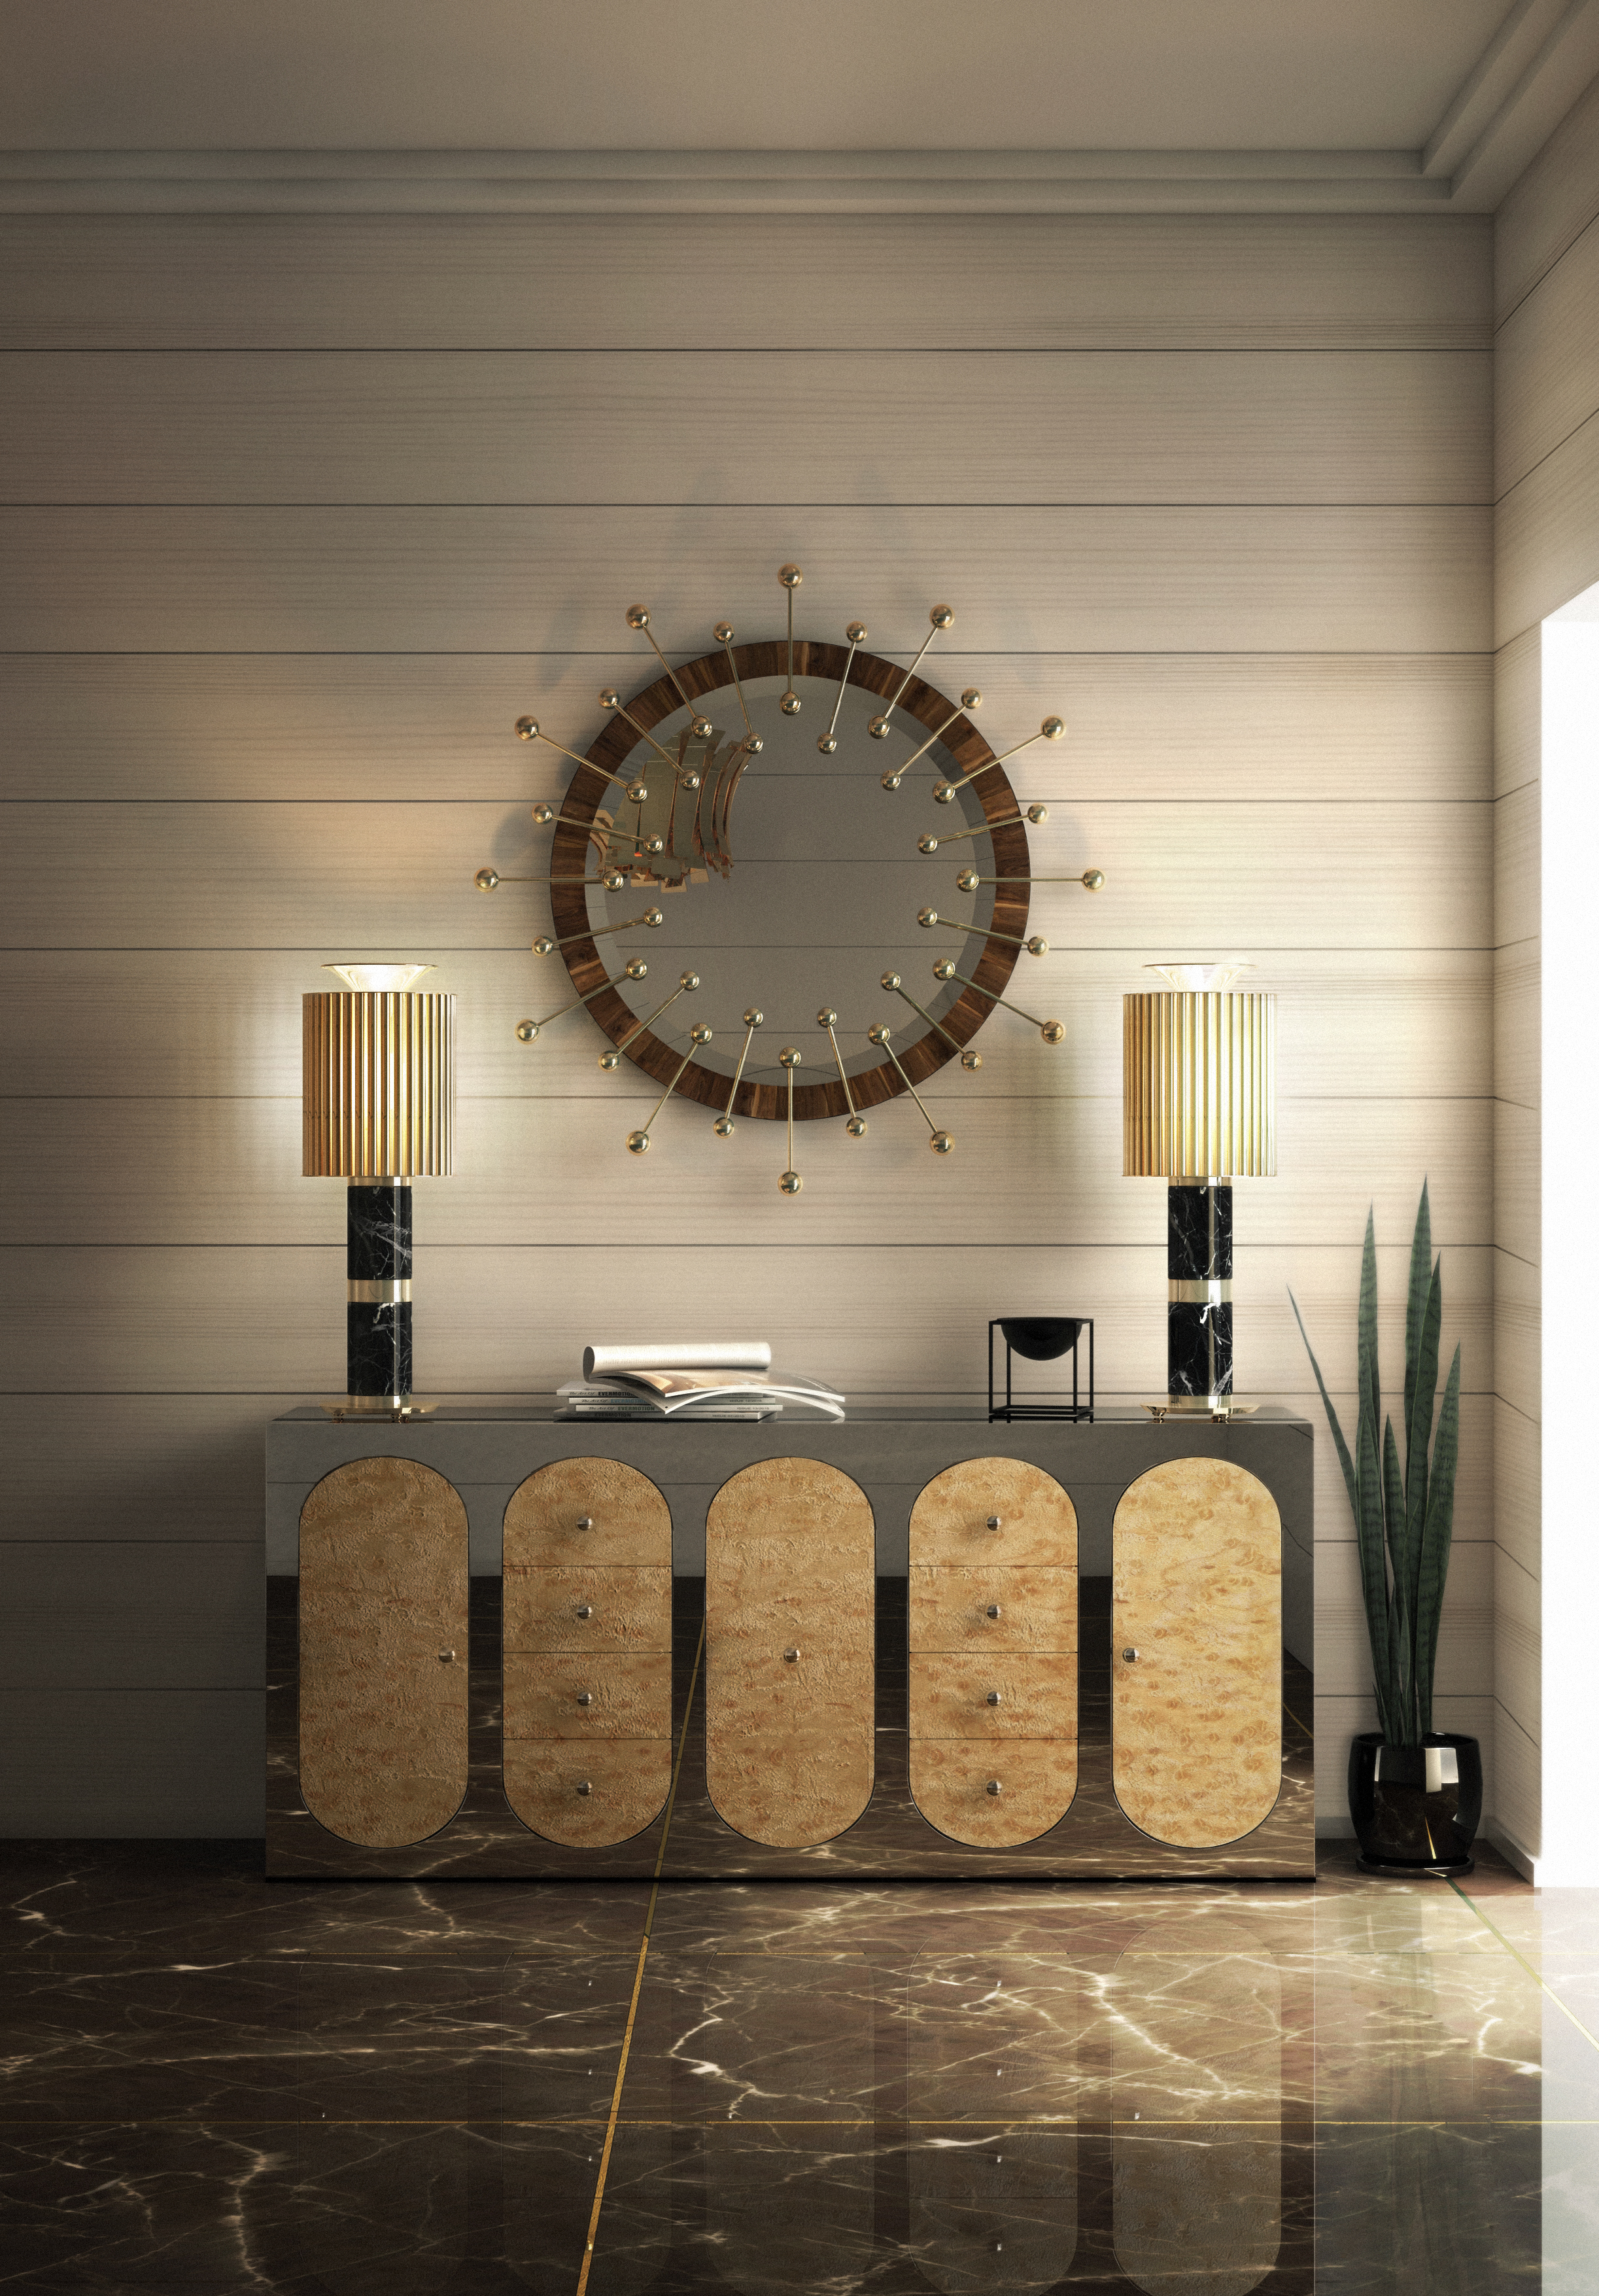 DUEL LAMPS - So many homes have those spaces that just never seem to get adequate lighting. A credenza can easily solve that problem by holding two statement lamps in that dark space. They’ll work together to light up the room and create a visually pleasing design, like Donna Table lamps do.